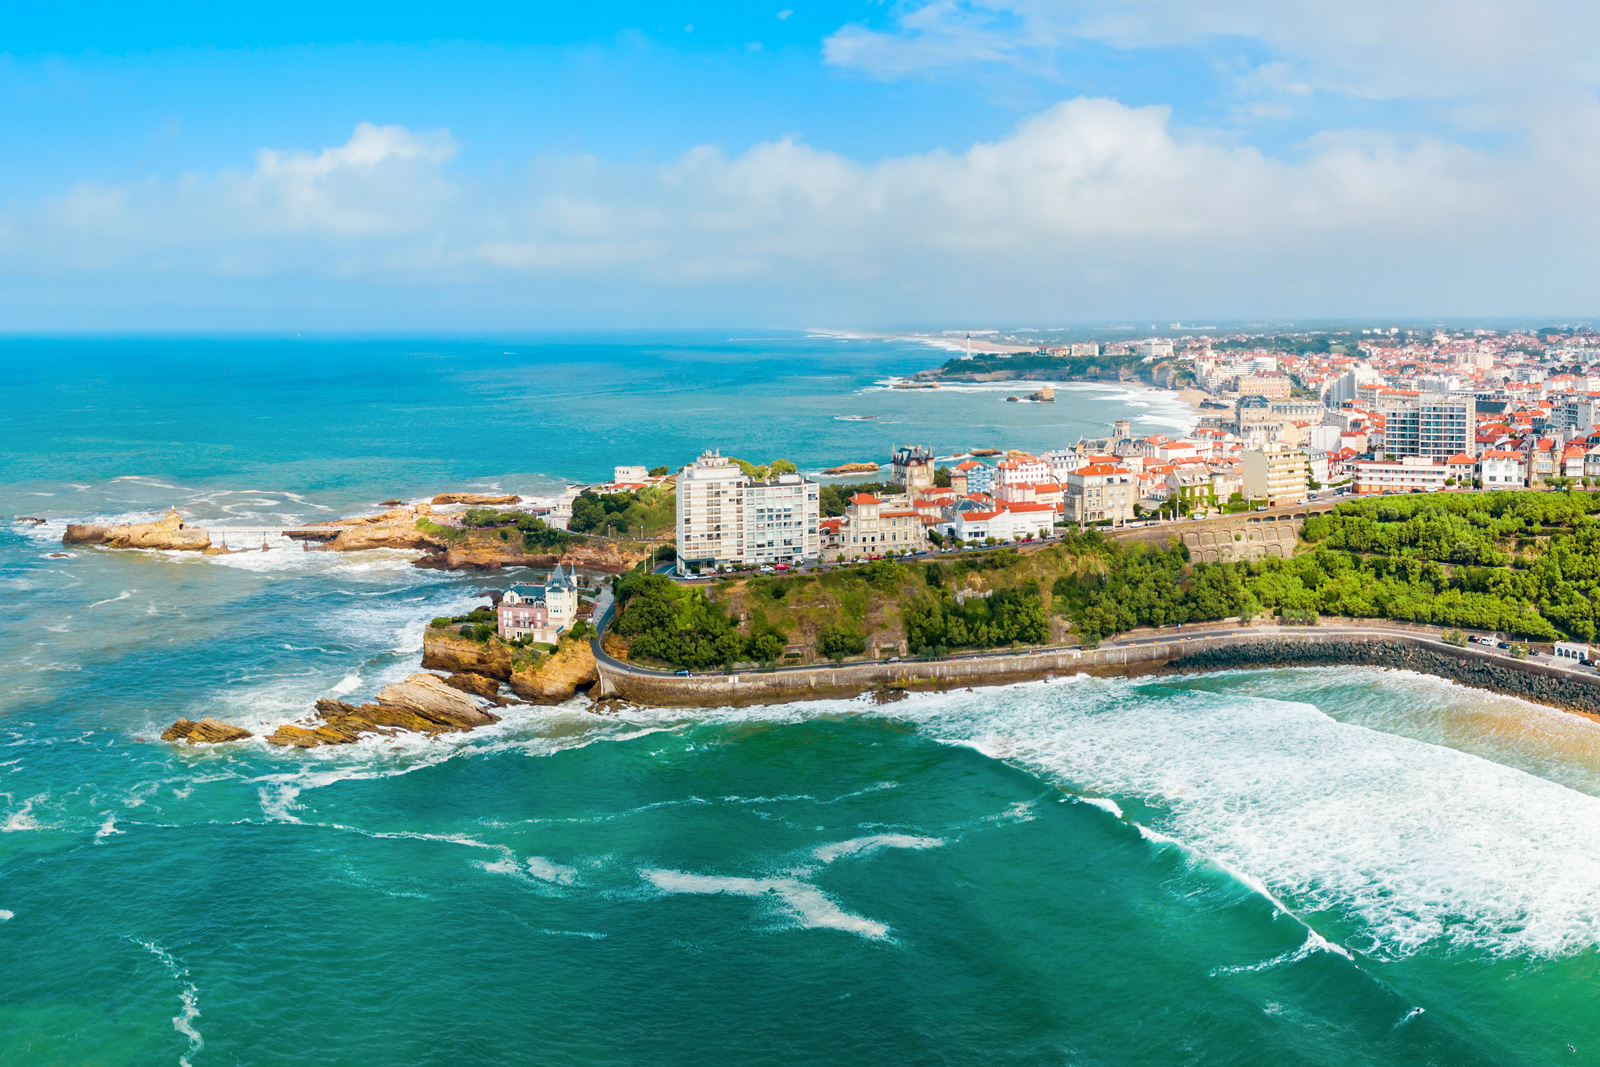 The best things to do on Sunday in Biarritz